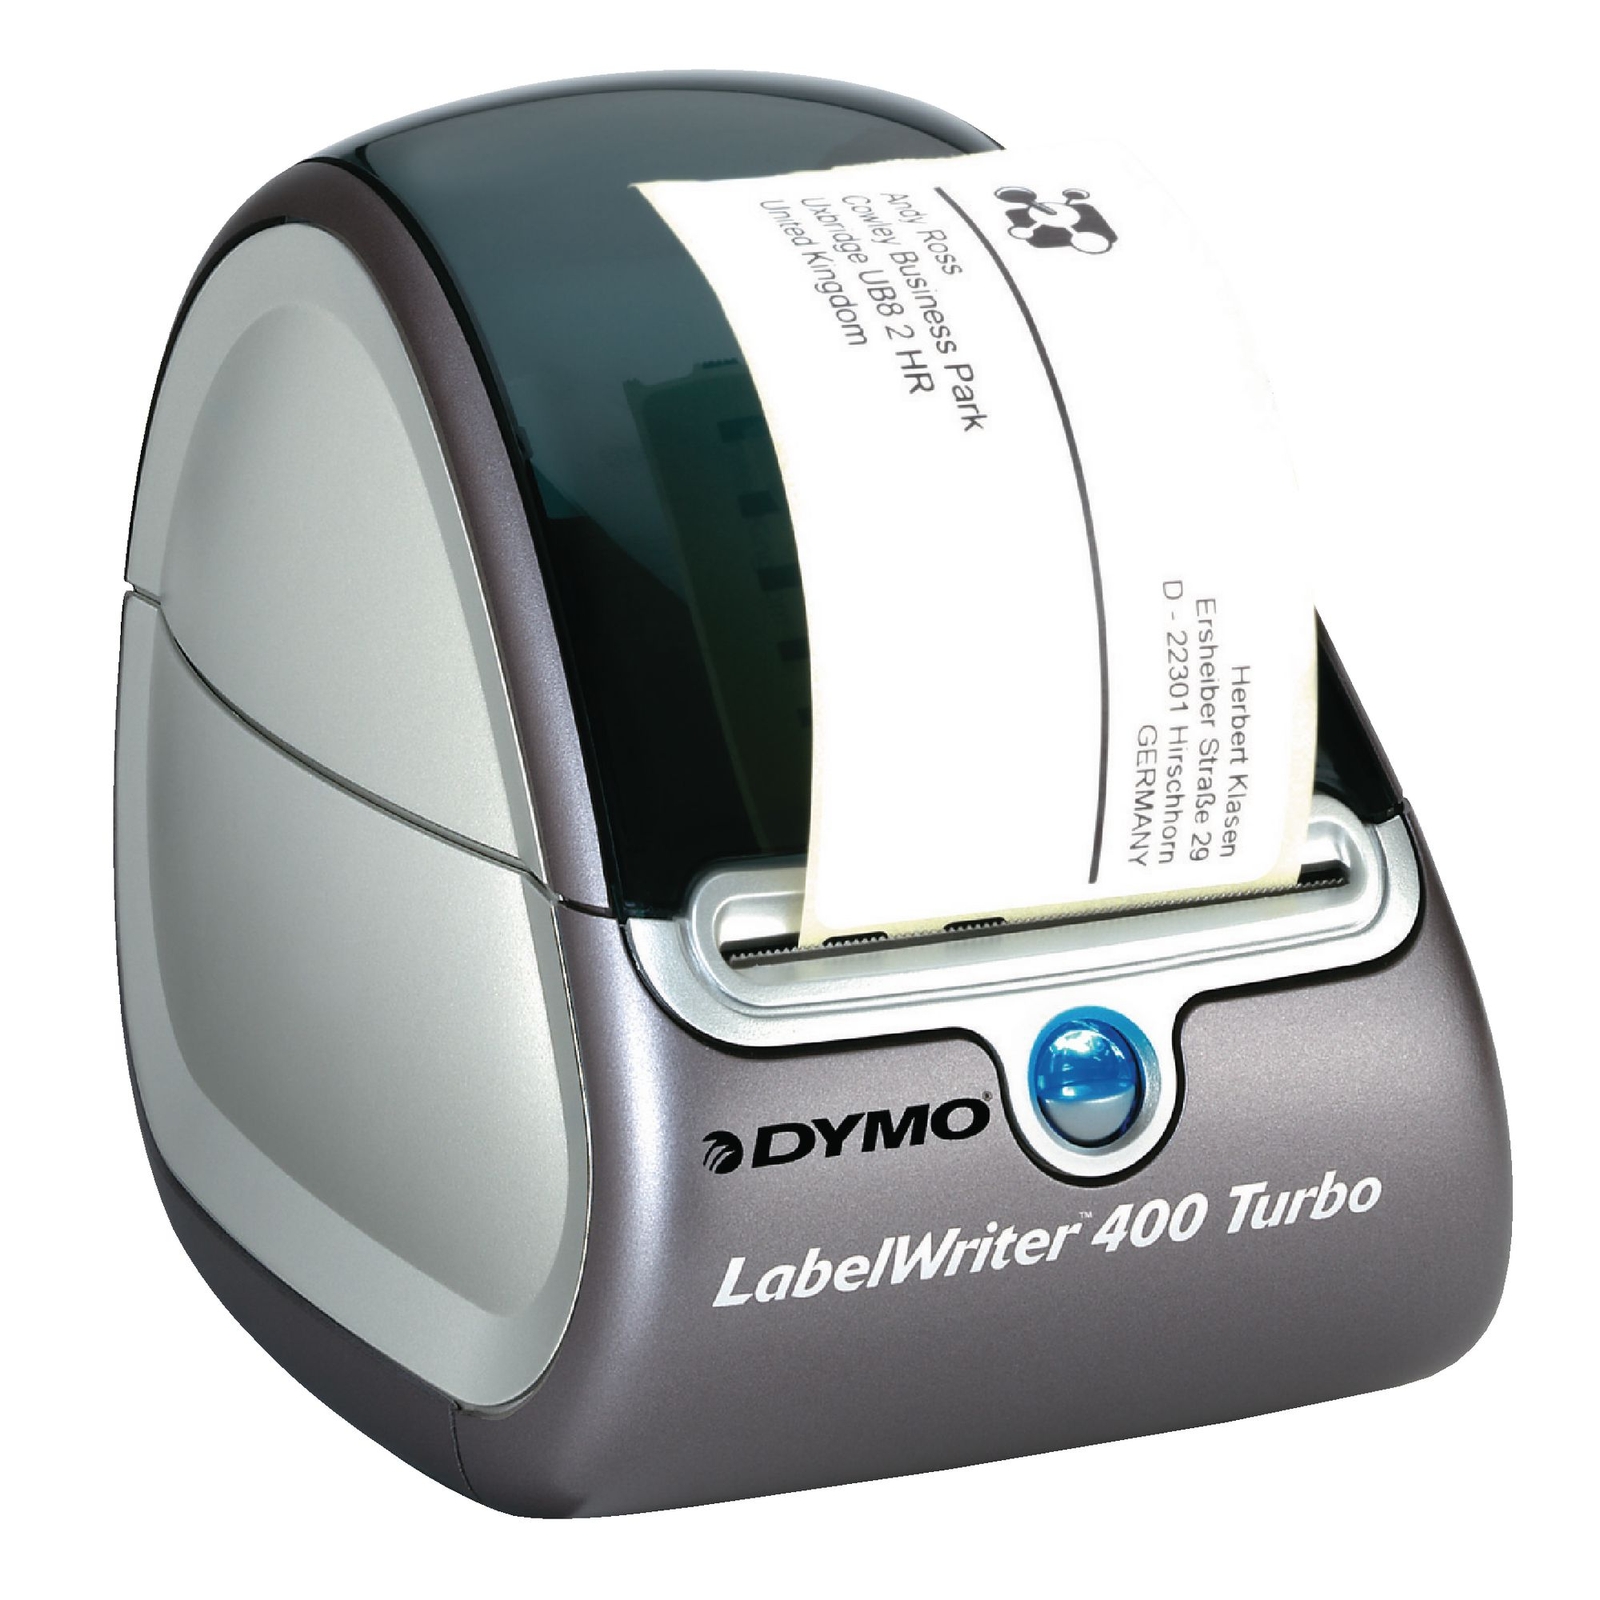 Dymo labelwriter 450 twin turbo software download